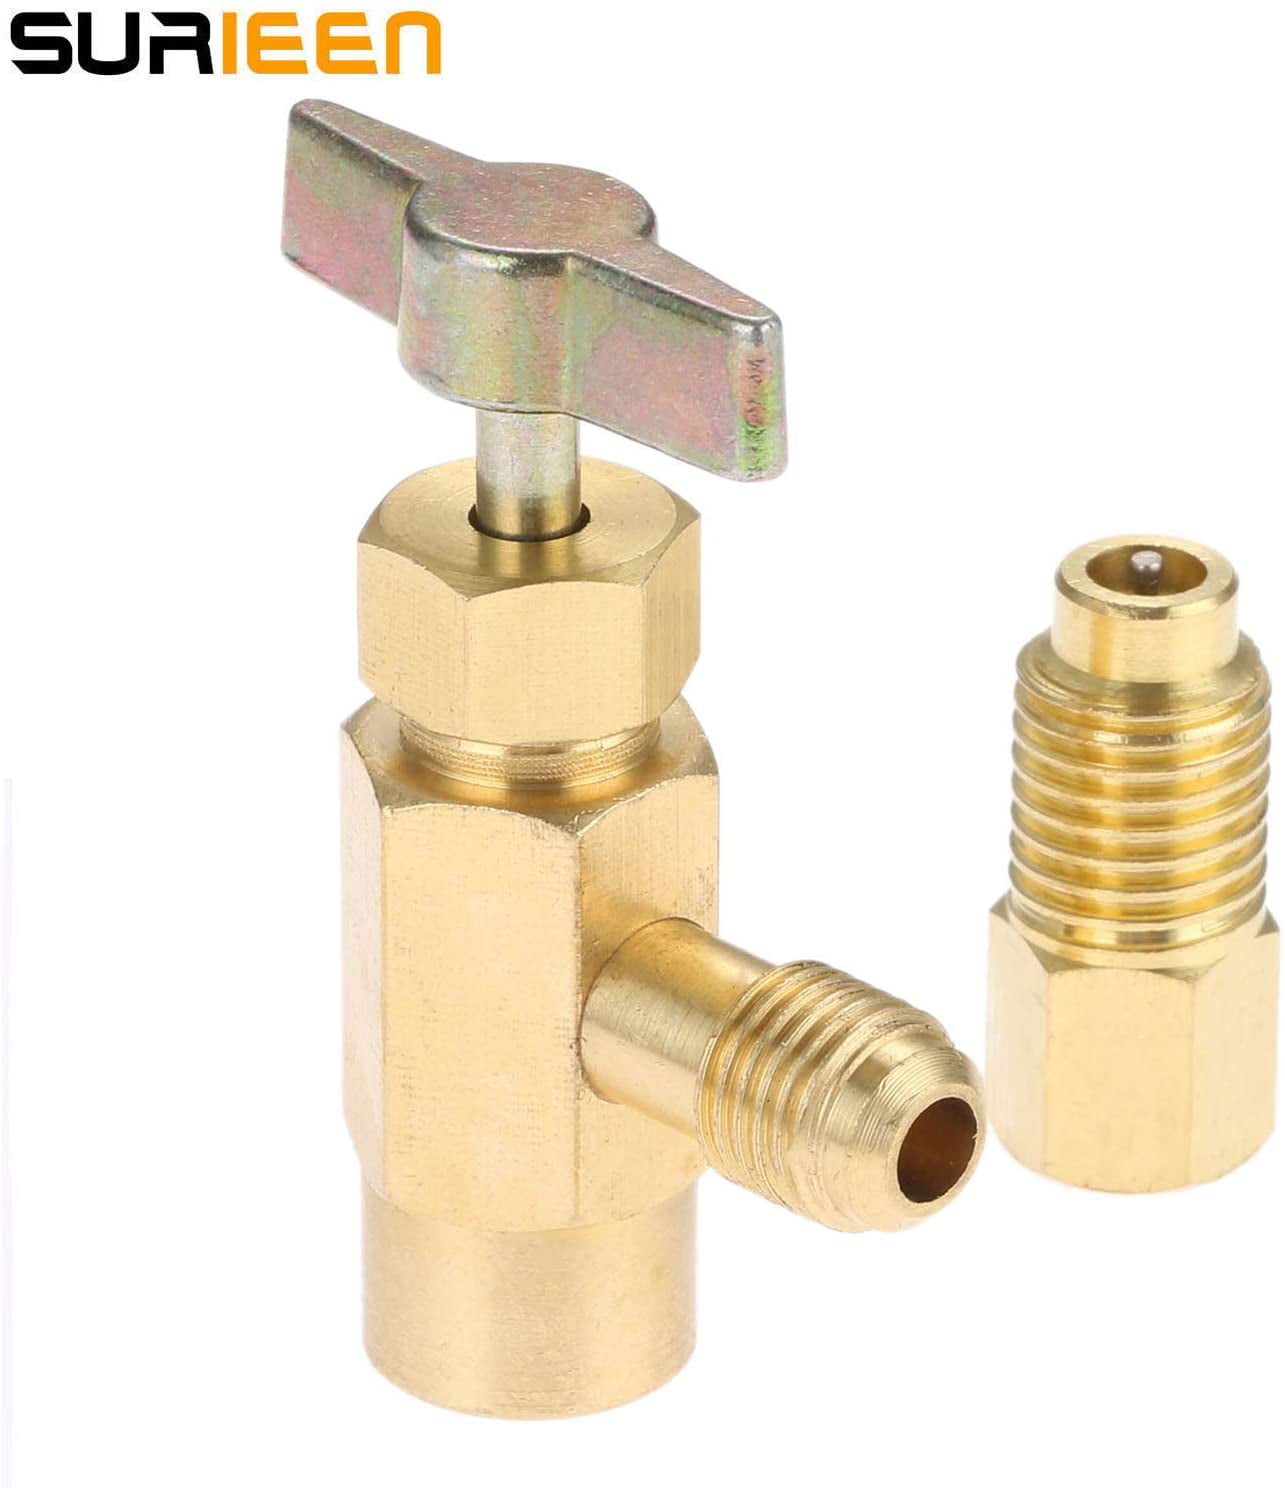 F-1/4 SAE 1/2 Acme LH Thread Valve Tool Bottle Opener with F-1/4 SAE to M-1/2 Acme Connector Adapter for R134a R12 R22 Charging Hose SURIEEN R1234yf Self-Sealing Can Tap Depressor 